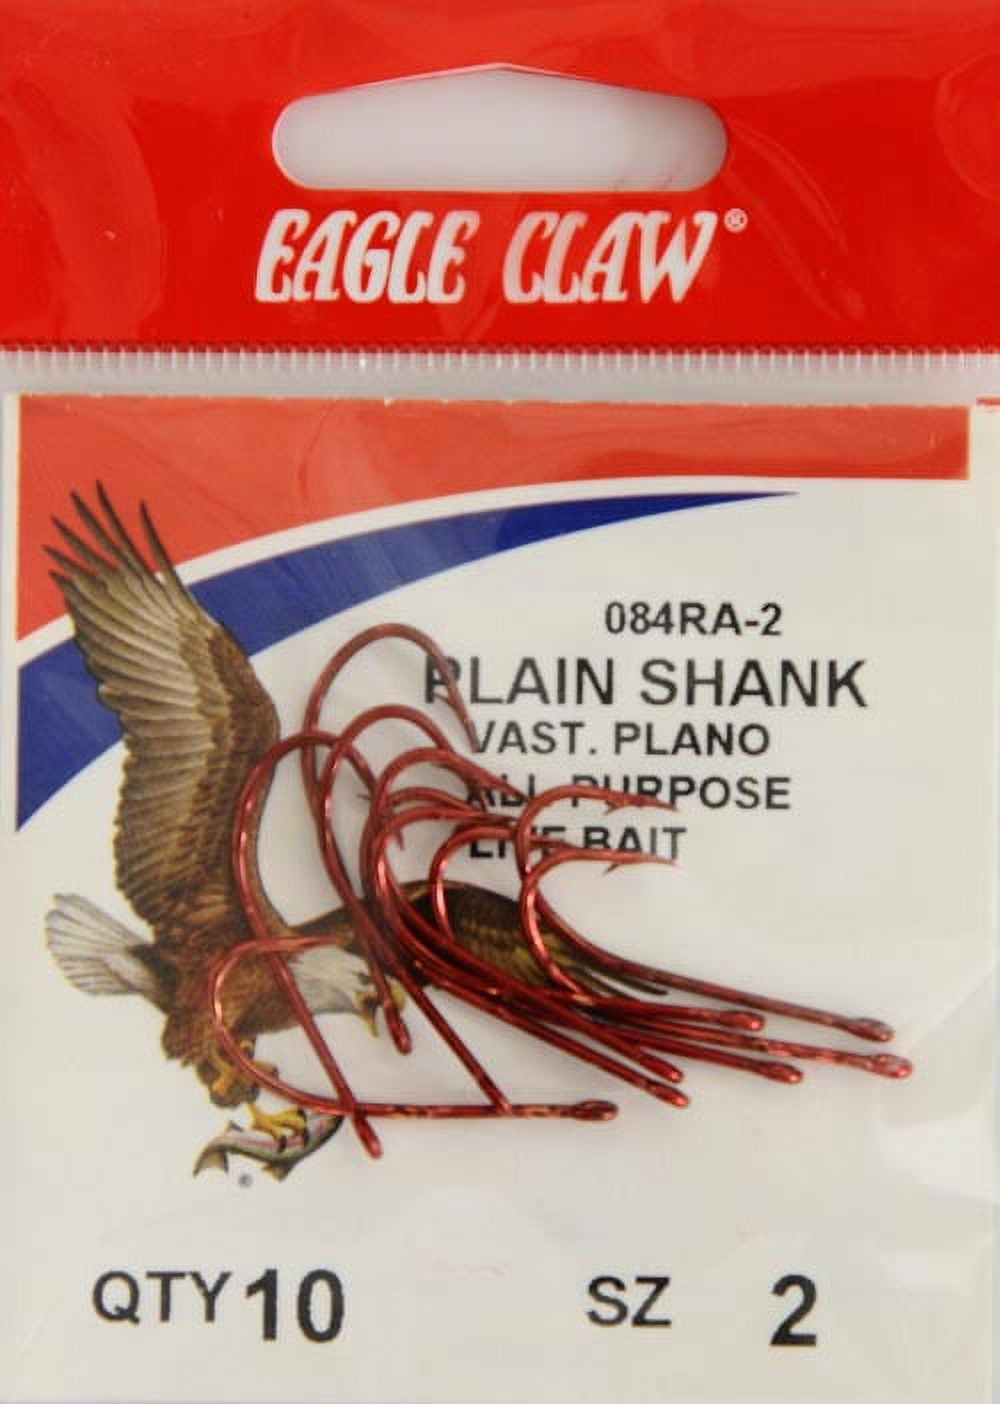 Eagle Claw 084RAH-2 Plain Shank Offset Hook, Red, Size 2, 10 Pack